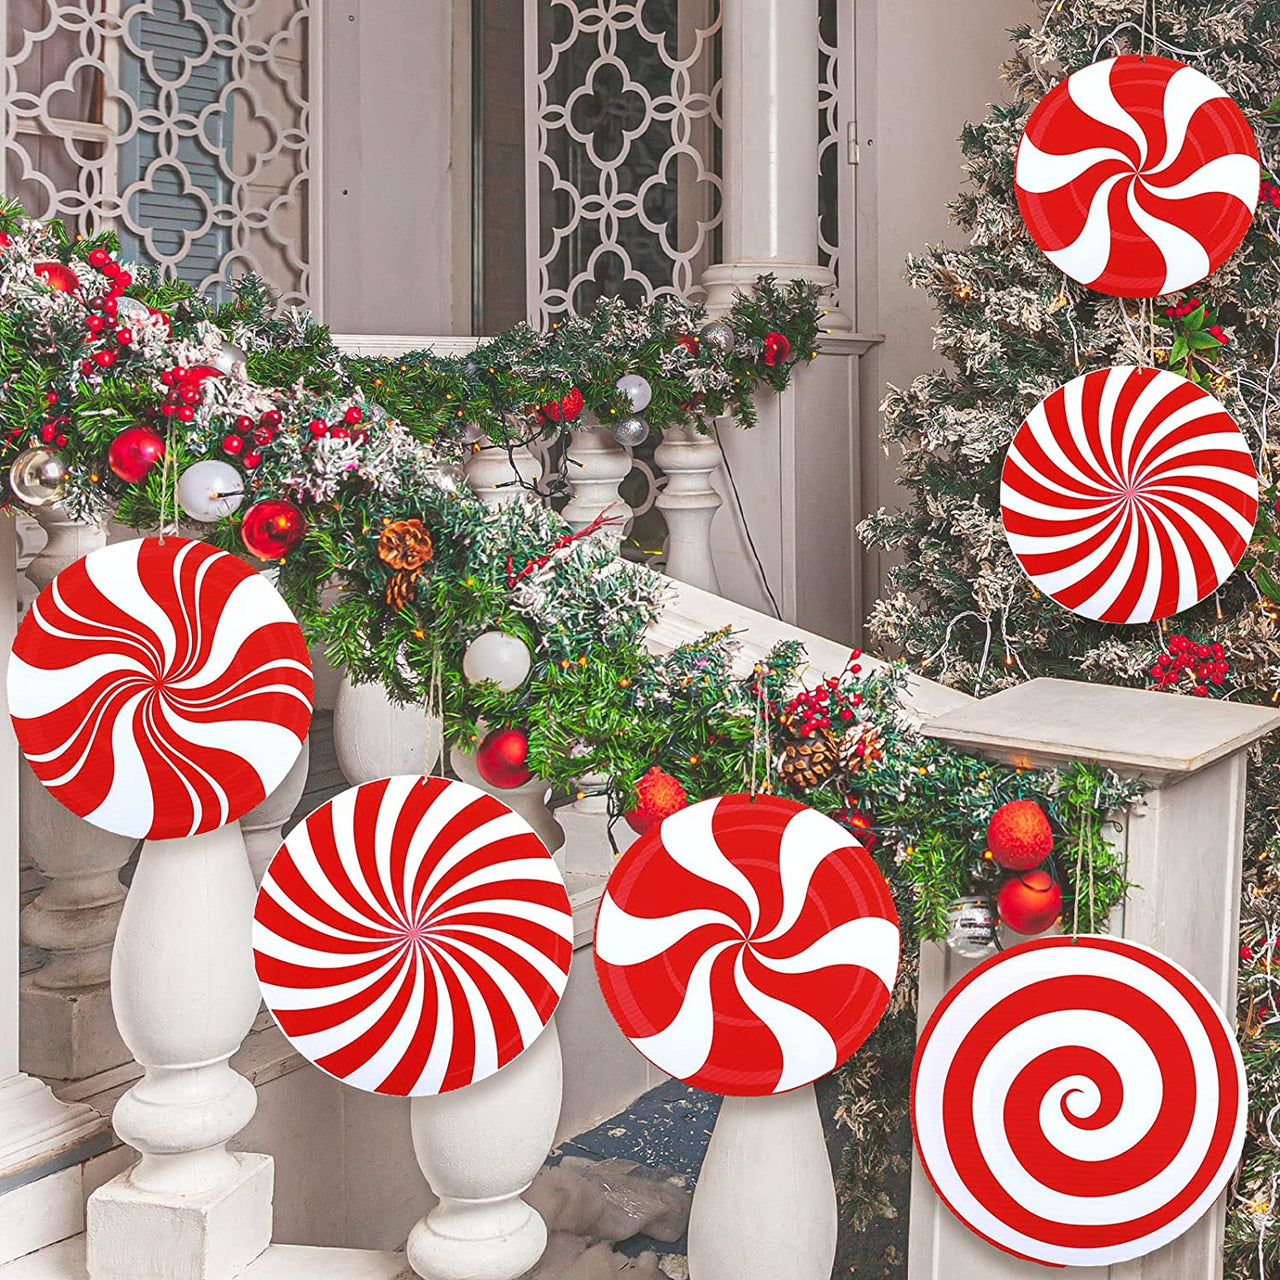 16 Pcs Outdoor Holiday and Christmas Hanging Porch and Tree Yard Lawn Decoration Christmas Large Candy Yard Decorations Outdoor Lawn Decoration Candy Hanging Ornaments for Holiday Decor